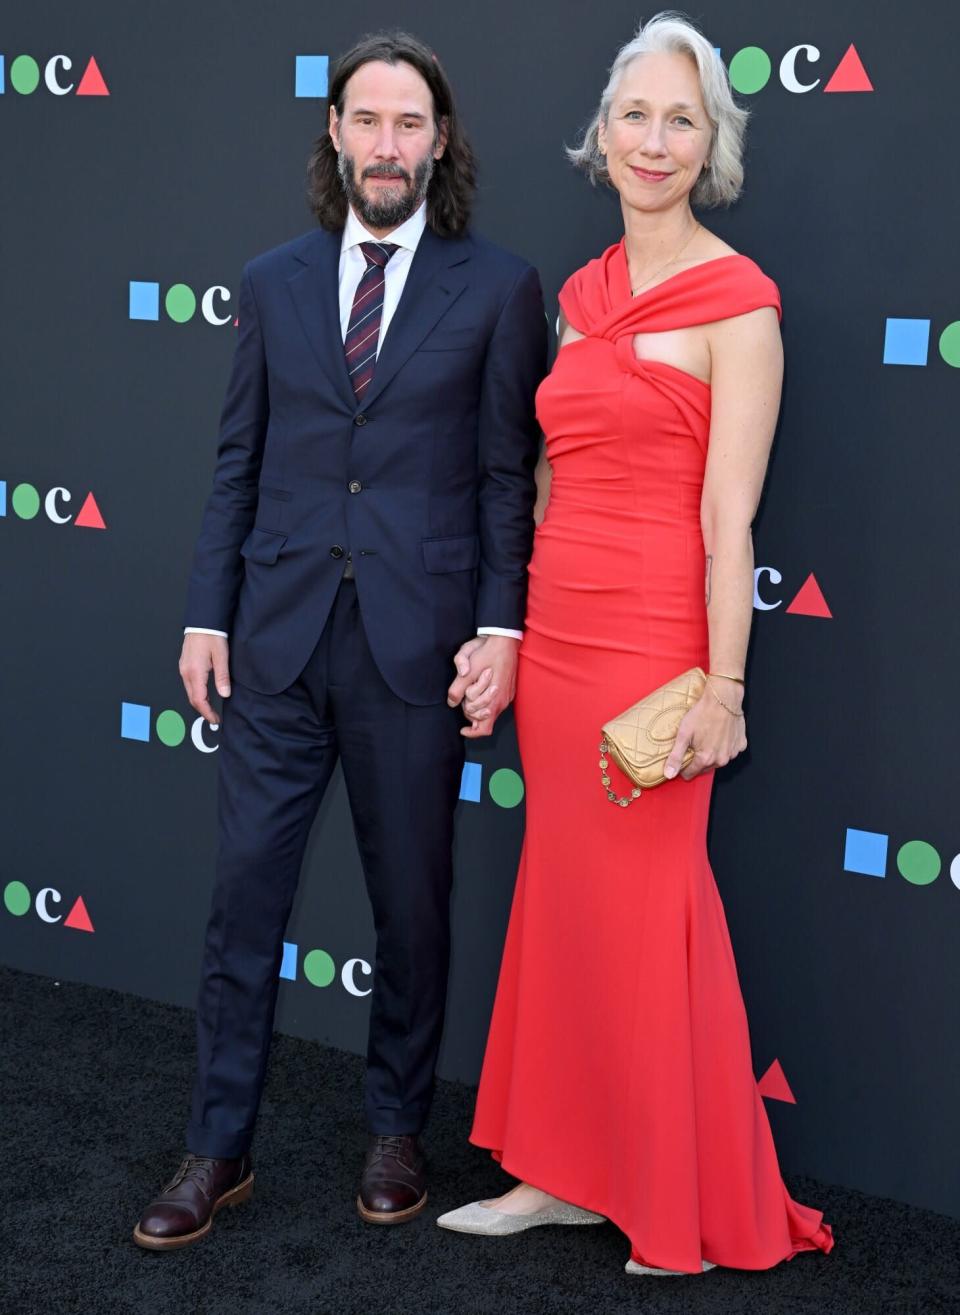 LOS ANGELES, CALIFORNIA - JUNE 4: Keanu Reeves and Alexandra Grant attend the MOCA Gala 2022 at The Geffen Contemporary at MOCA on June 4, 2022 in Los Angeles, California.  (Photo by Axelle / Bauer-Griffin / FilmMagic)